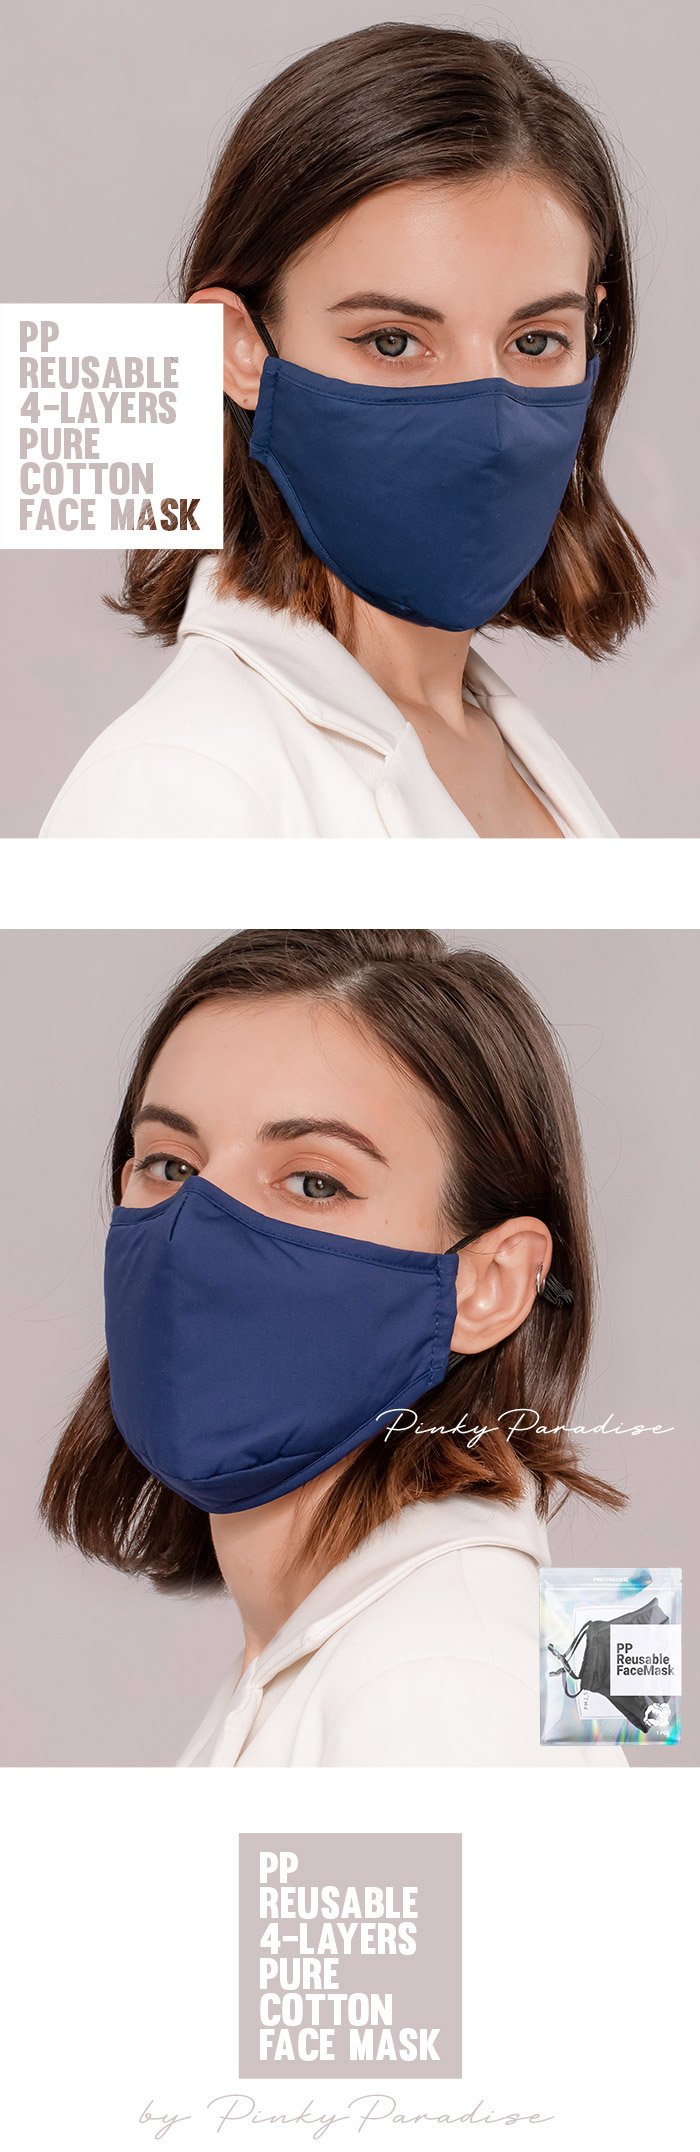 PP Reusable 4 layers Pure Cotton Face Mask in blue color